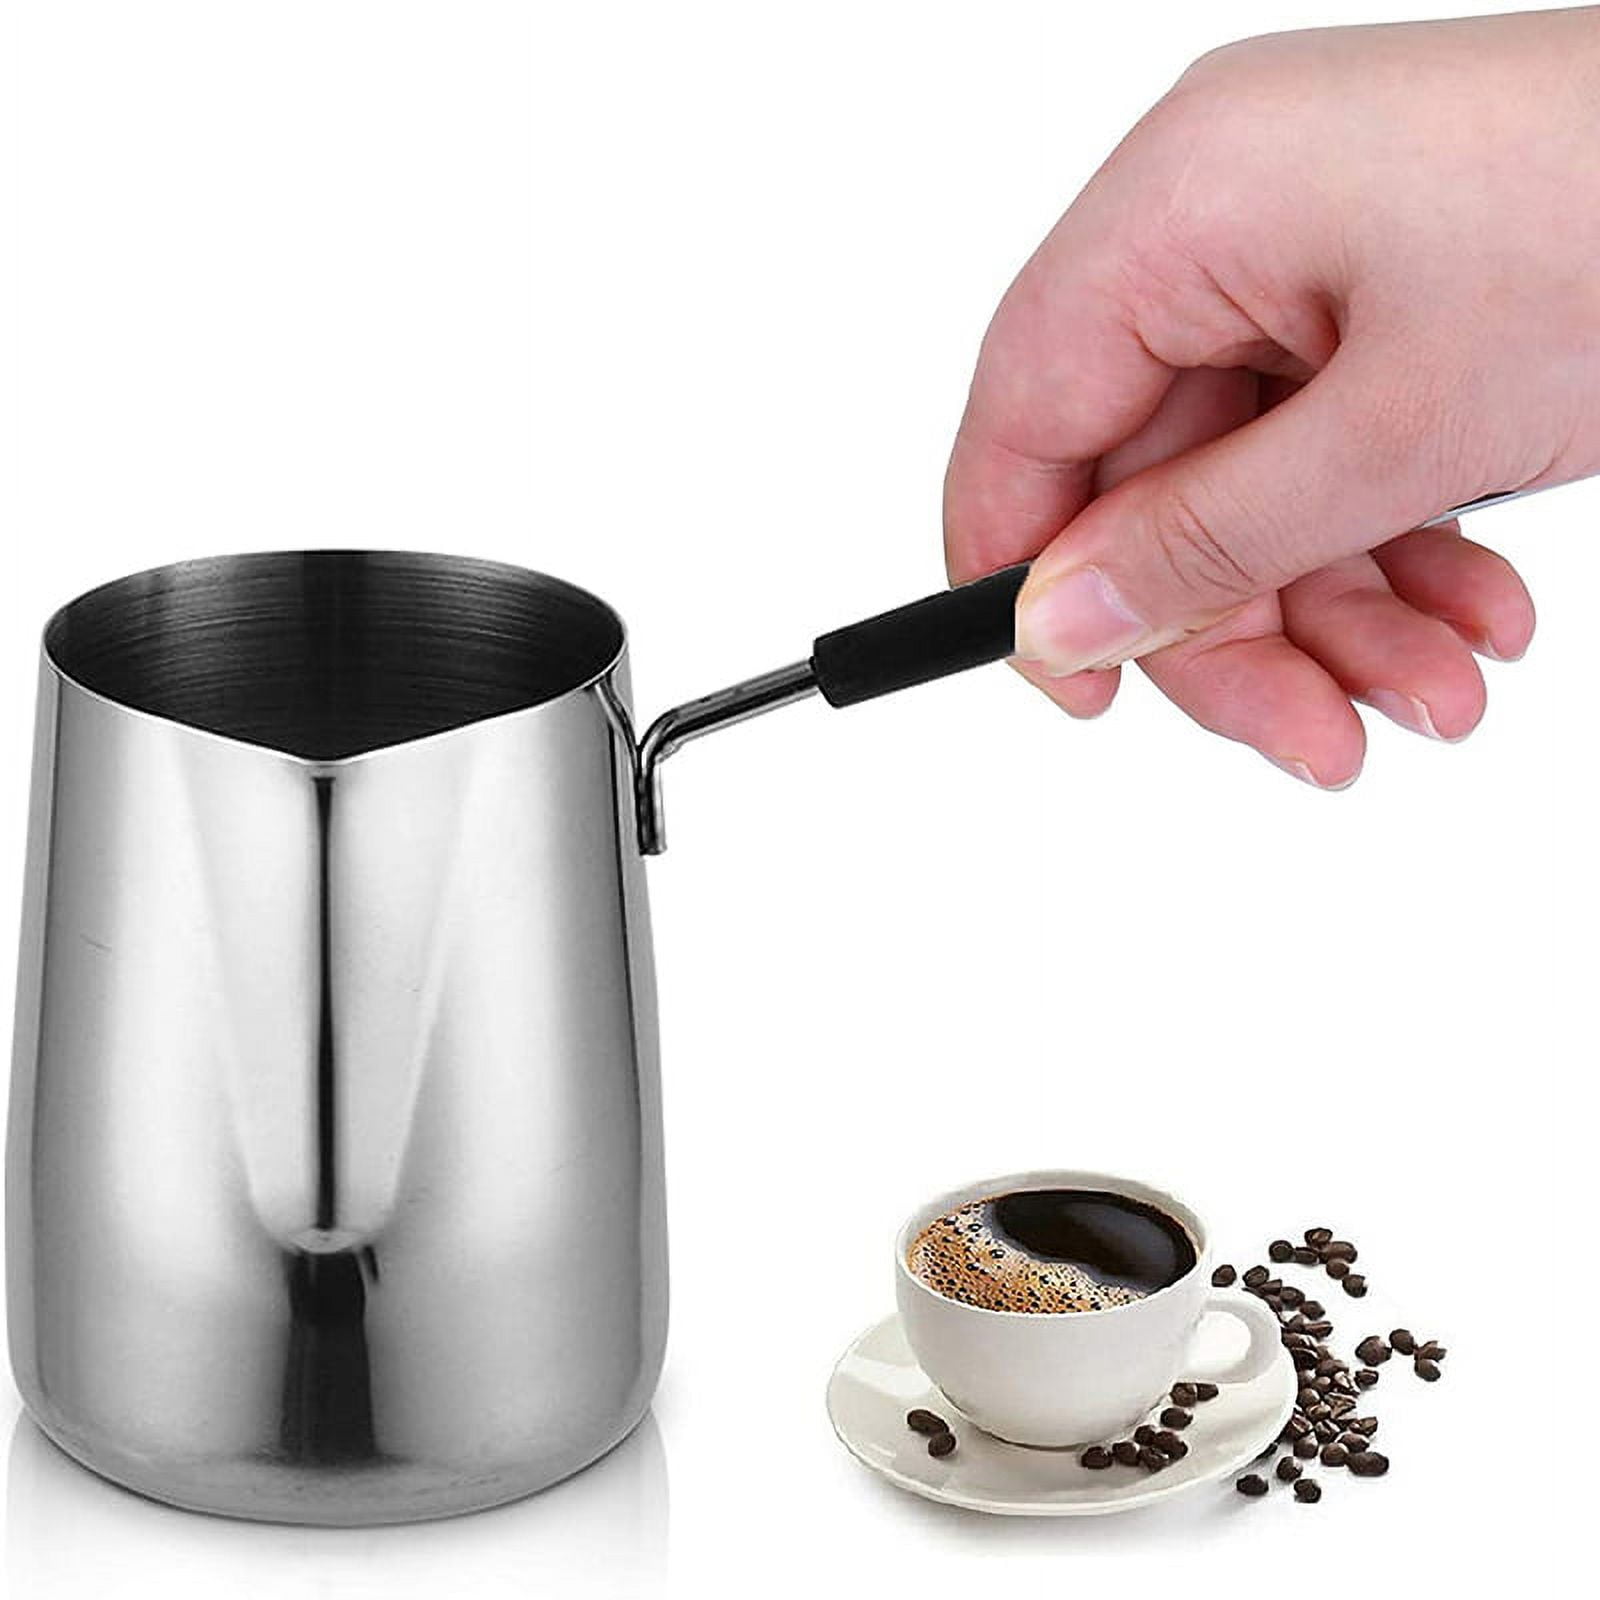 Warmer Turkish Coffee Pot, Milk Warmer Pot Warmer Mini Stainless Steel  Coffee Heating Melting Pot 900ml with Spout for Milk Steaming Milk Frothing